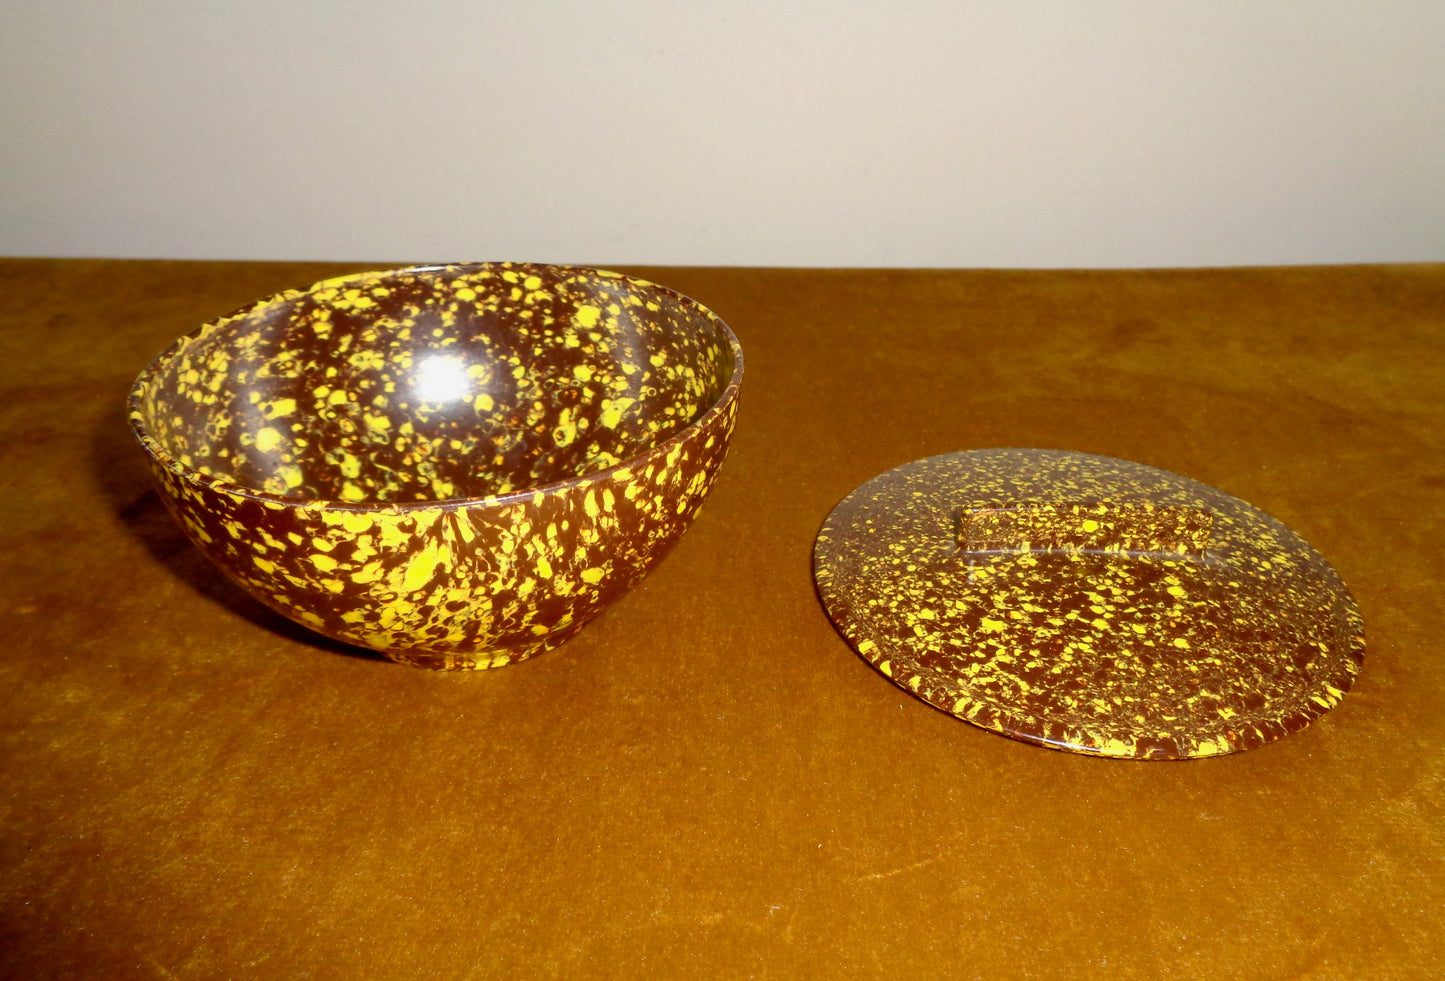 Vintage Bakelite Lidded Pot In Mottled Brown And Yellow Colours